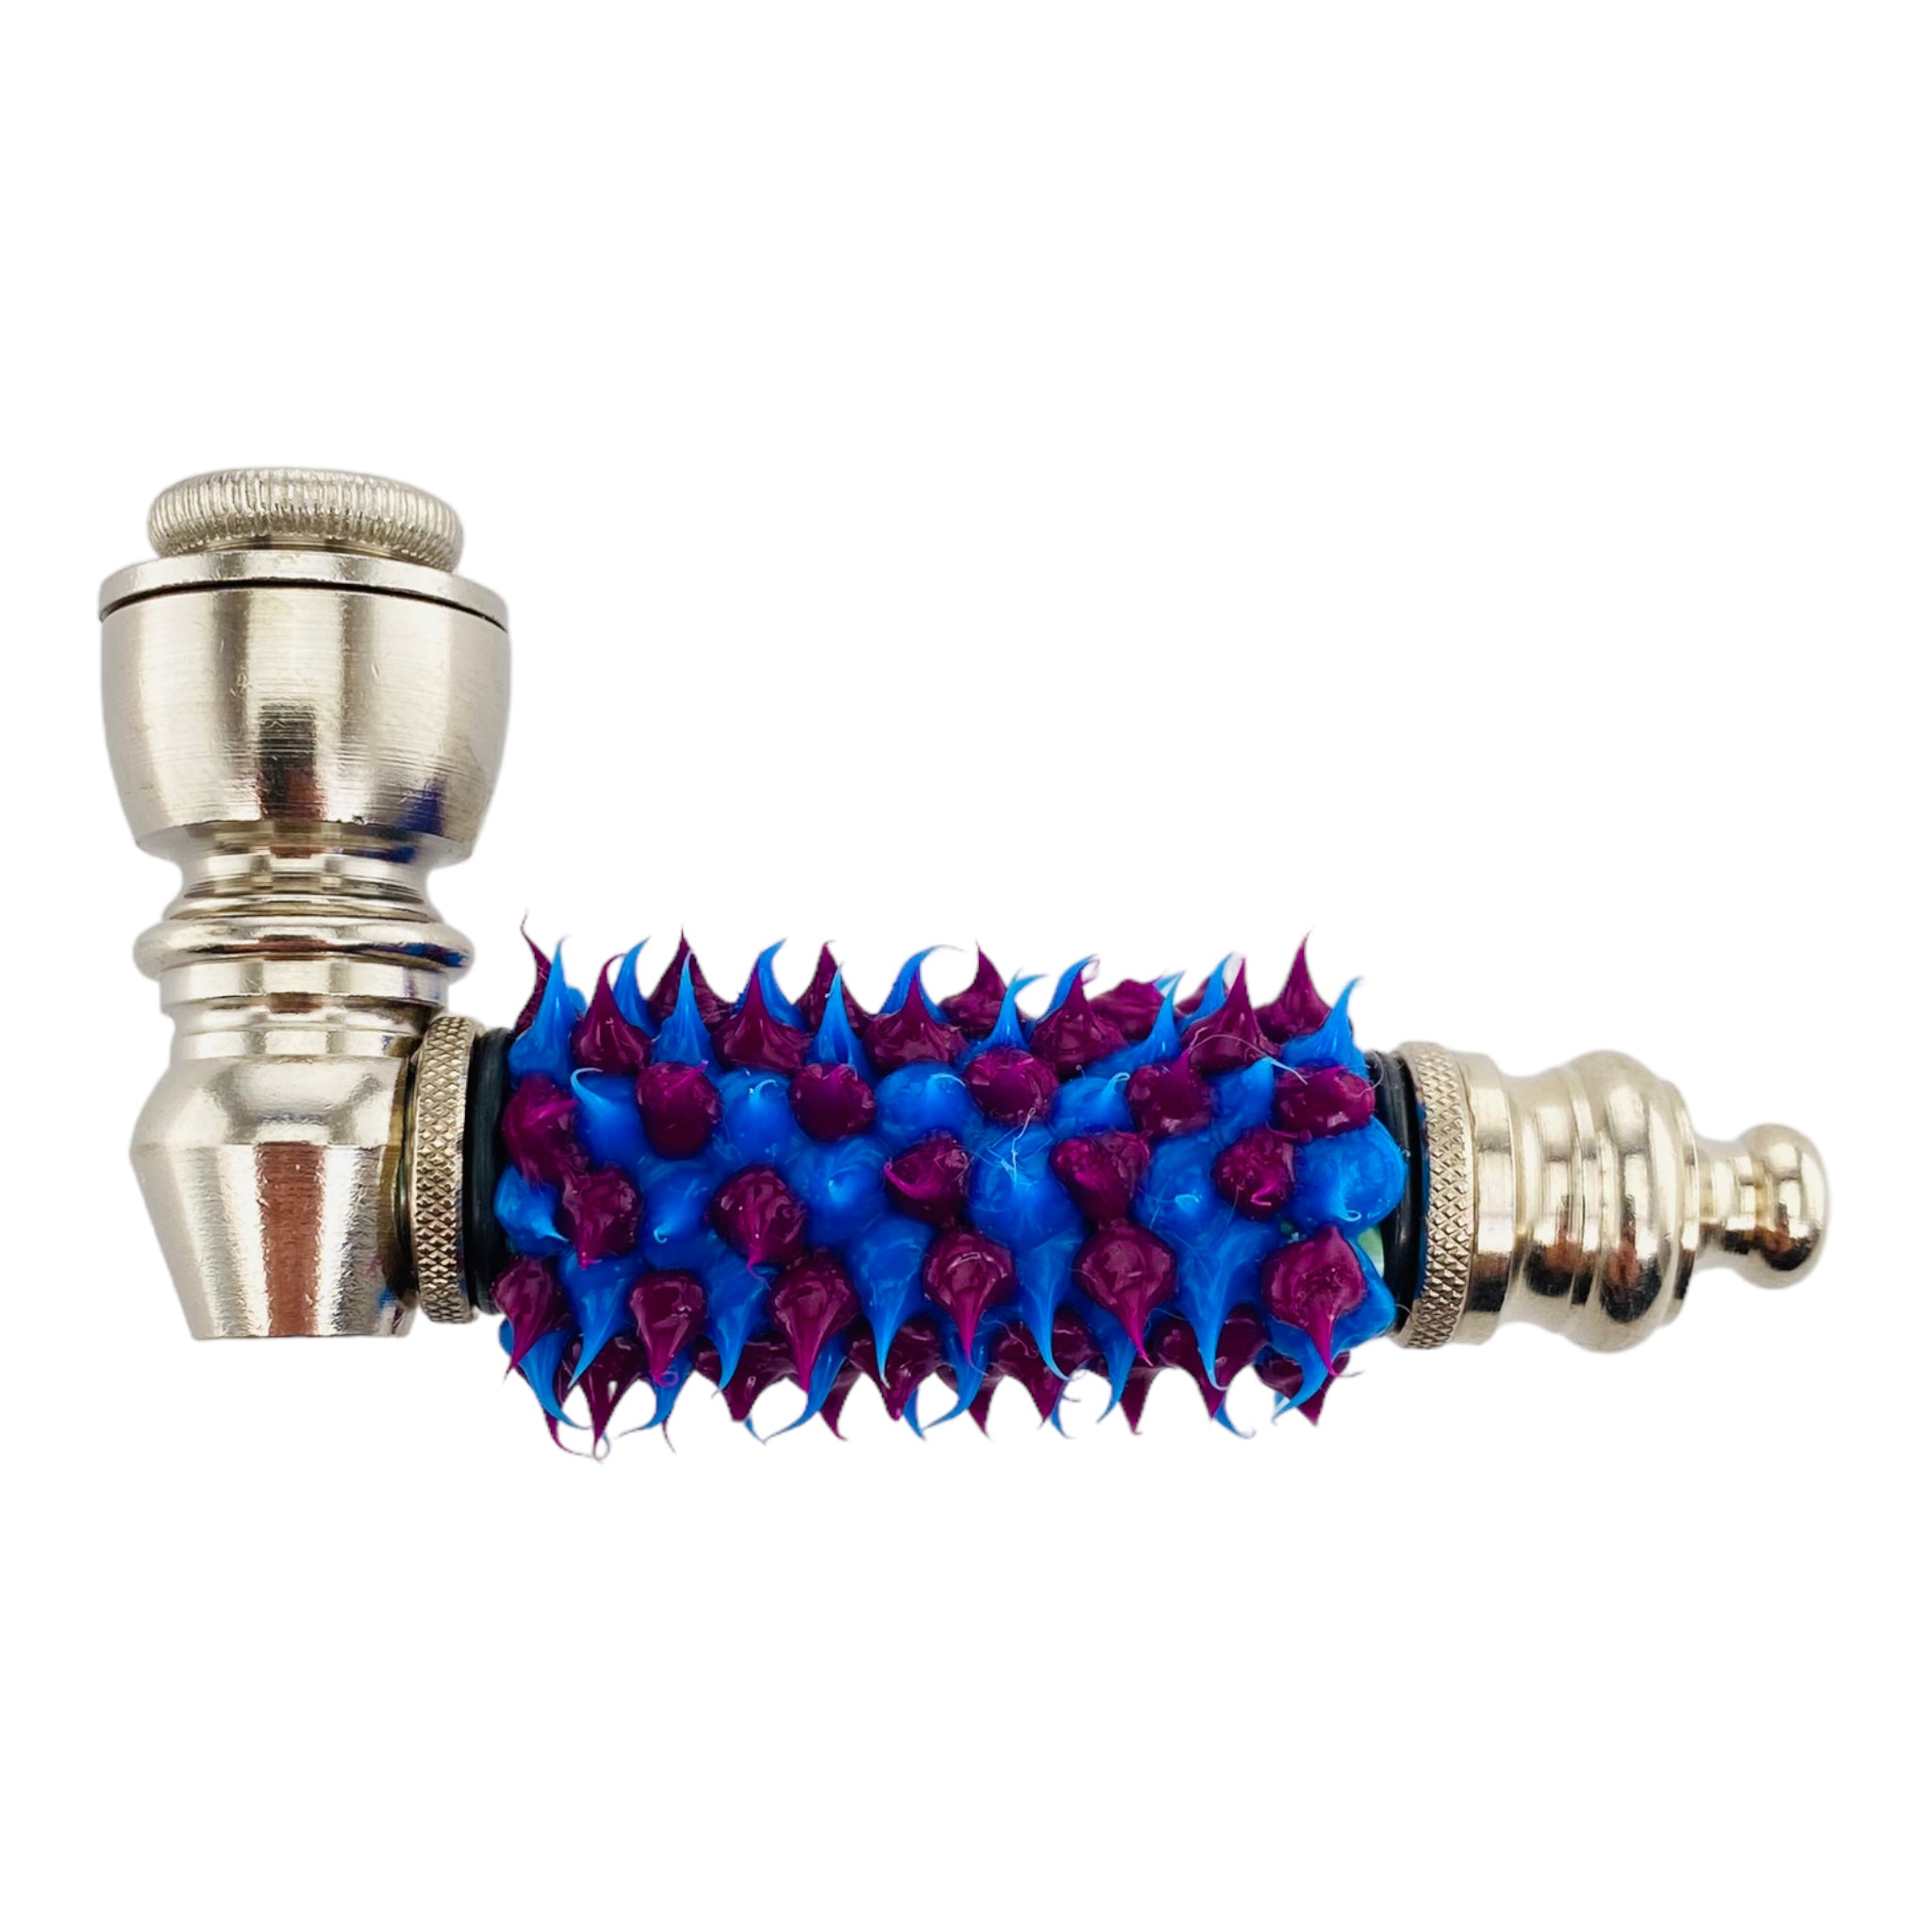 Metal Hand Pipes - Silver Chrome Hand Pipe With Blue And Purple Silicone Spikes